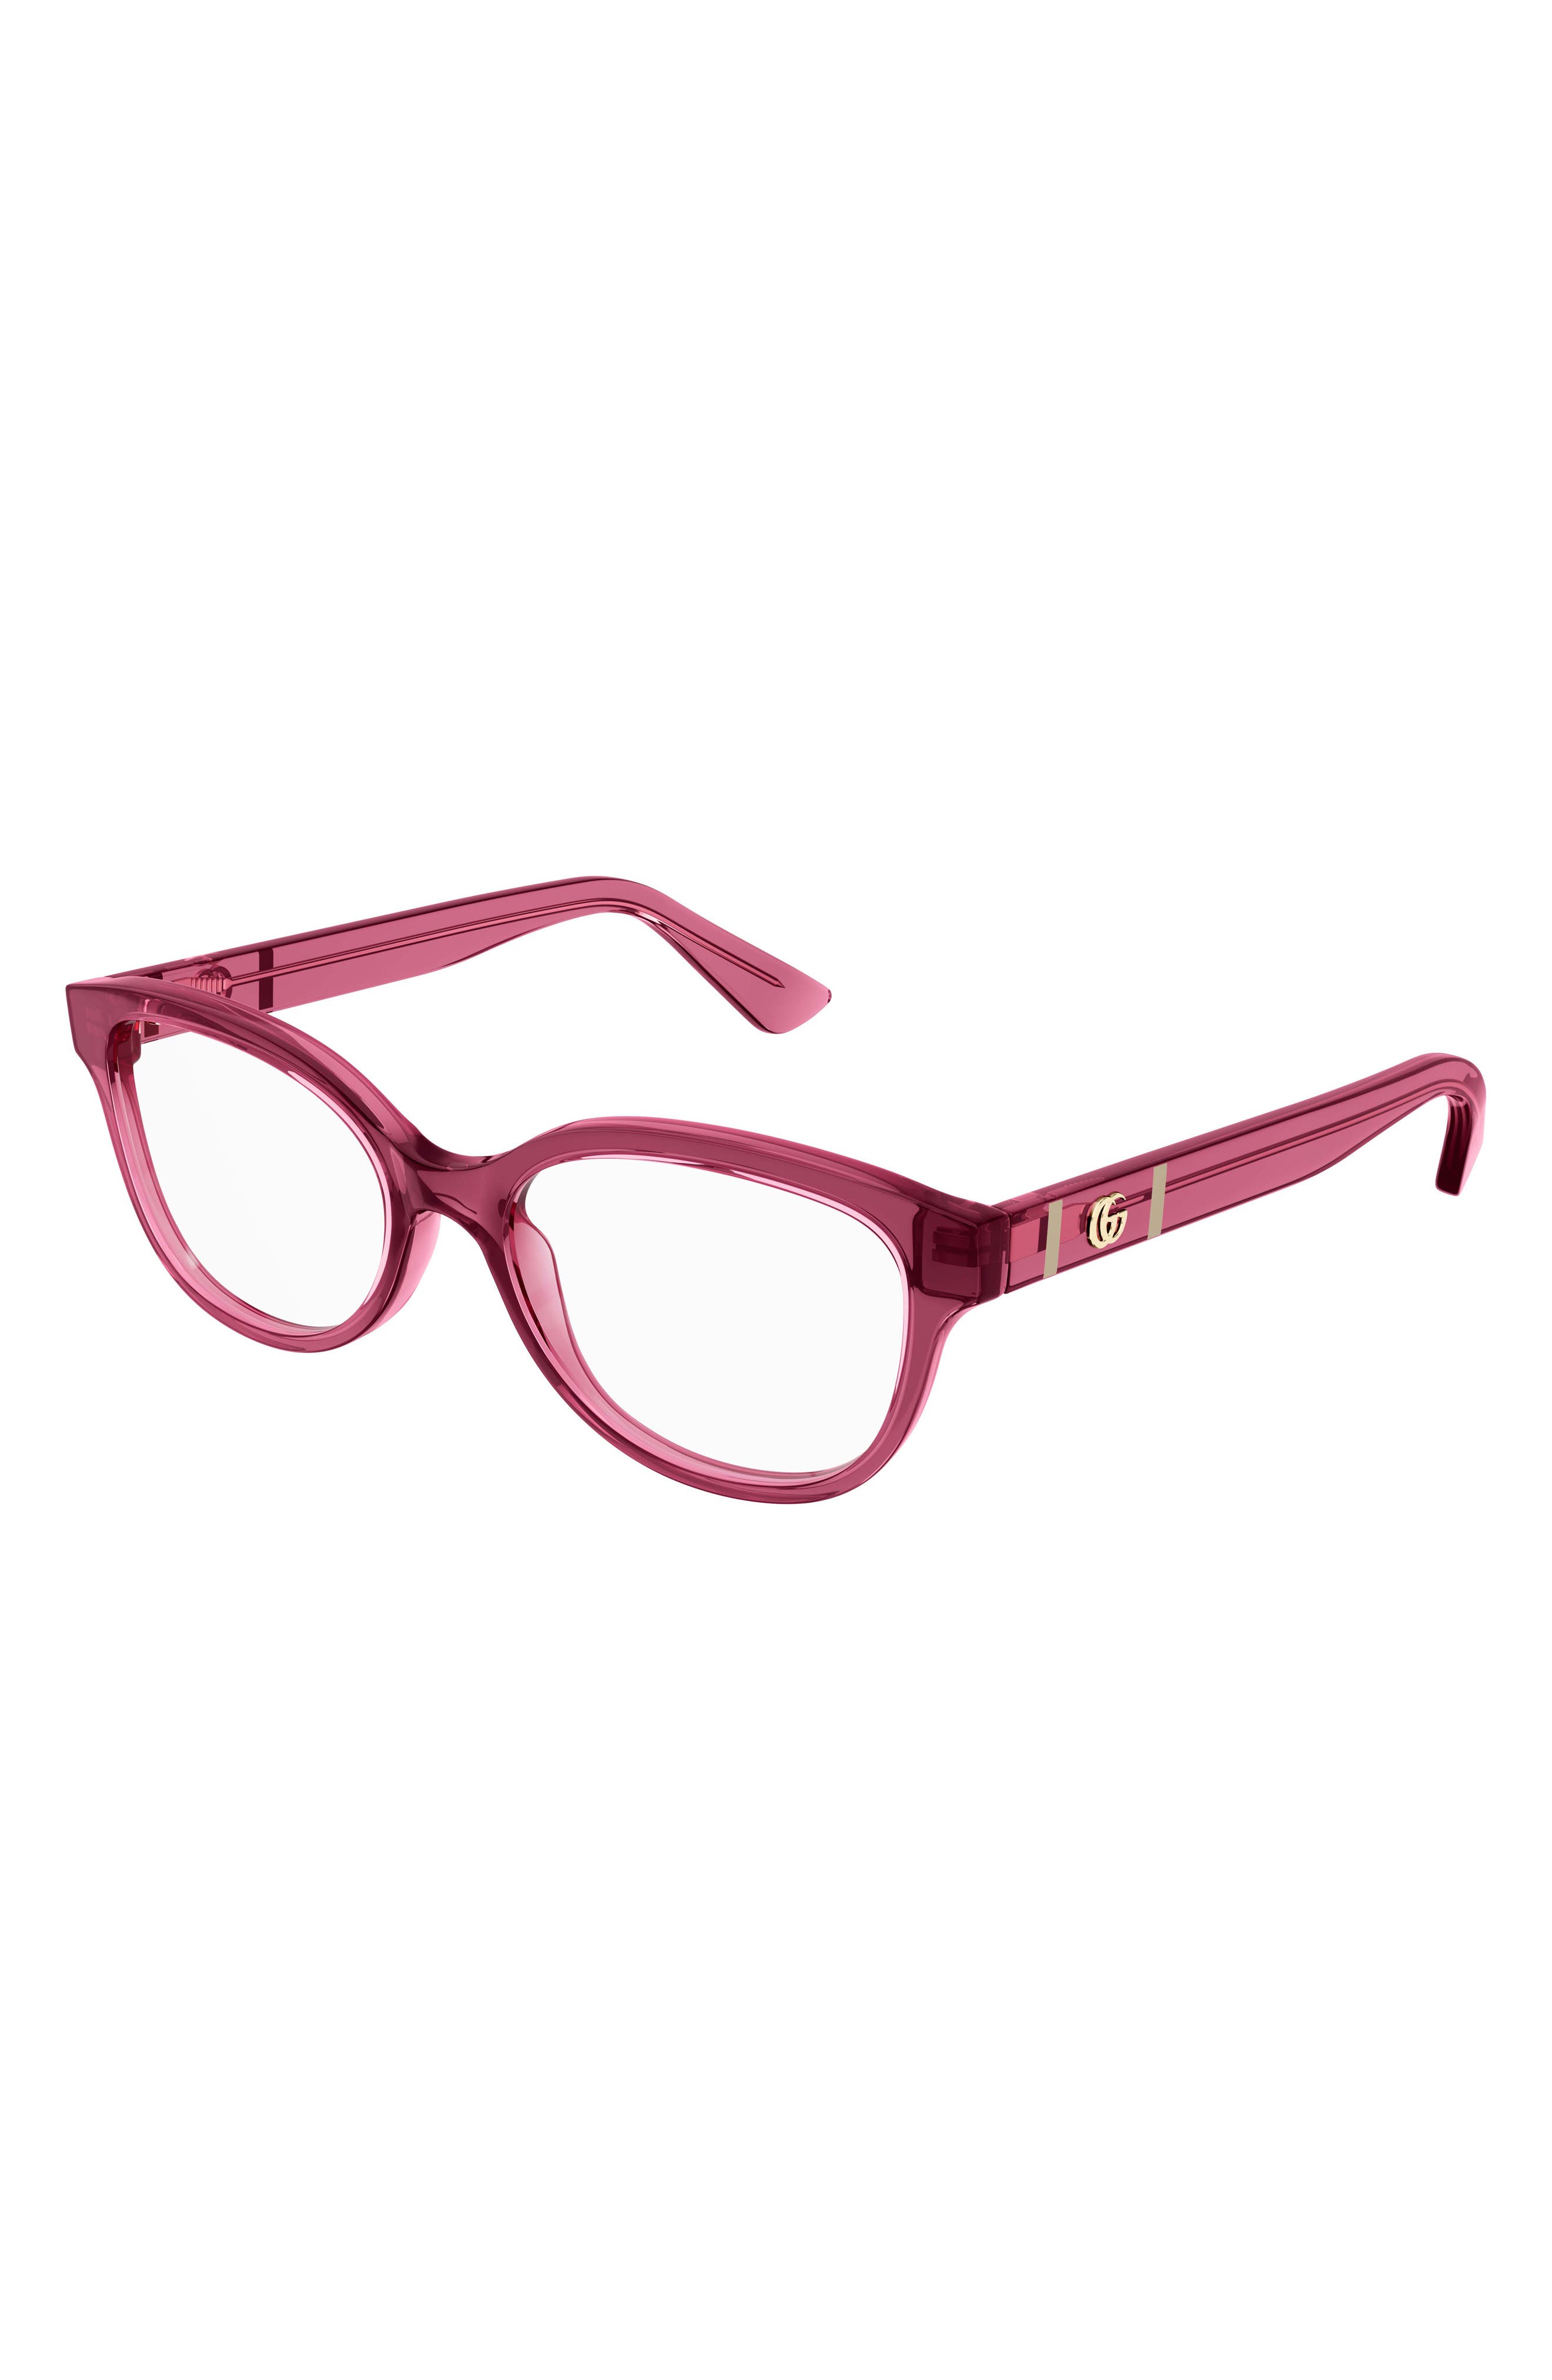 Gucci 53mm Rectangle Optical Glasses in Burgundy at Nordstrom